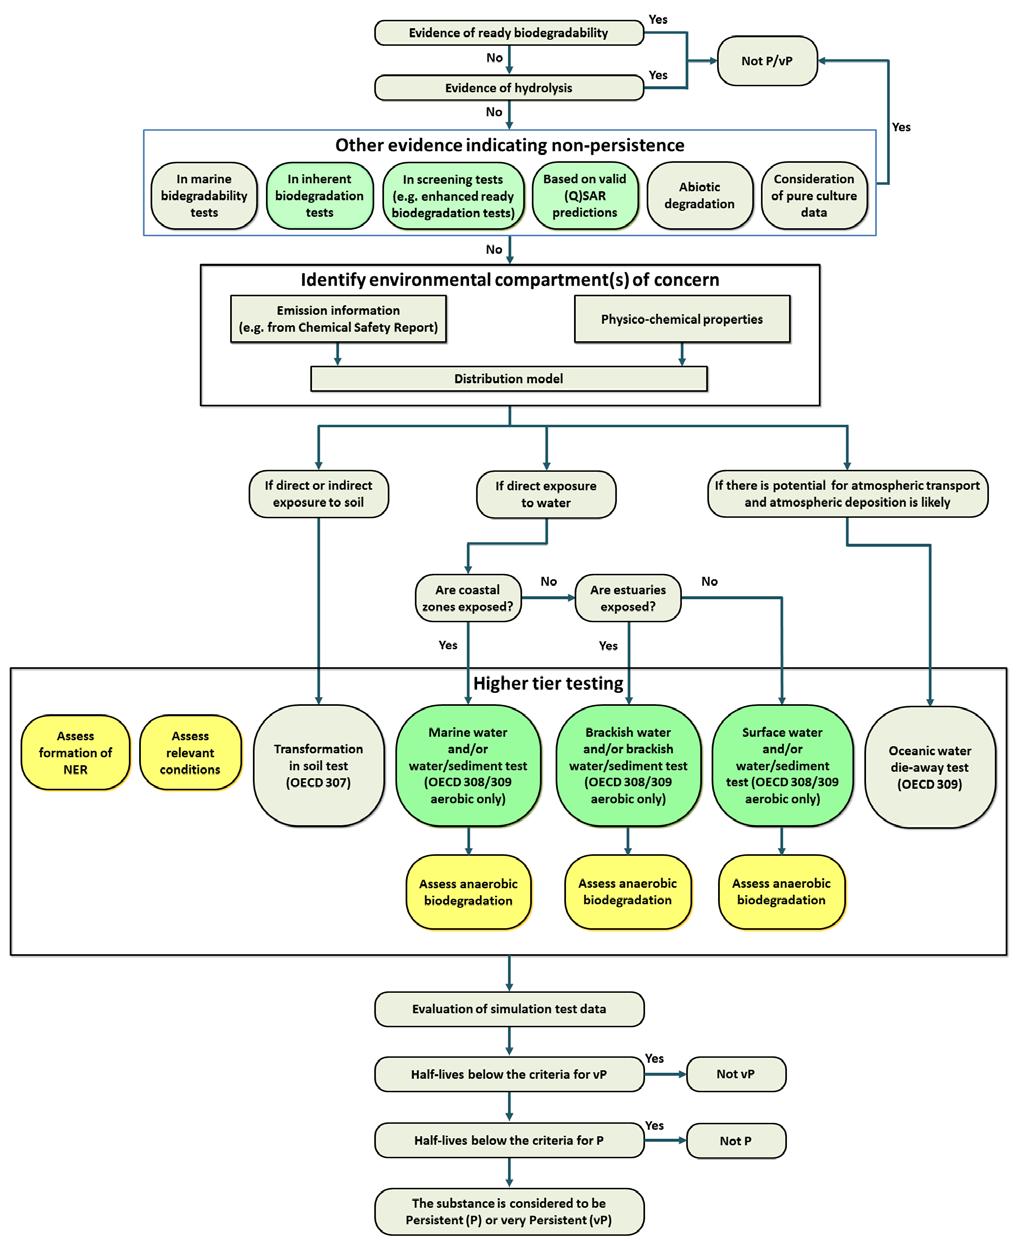 topics regarding persistence have been highlighted or added in the flowchart / decision tree, adapted from the final draft version of the PBT Assessment Guidance (ECHA, 2014) (Figure 6.1). Figure 6.